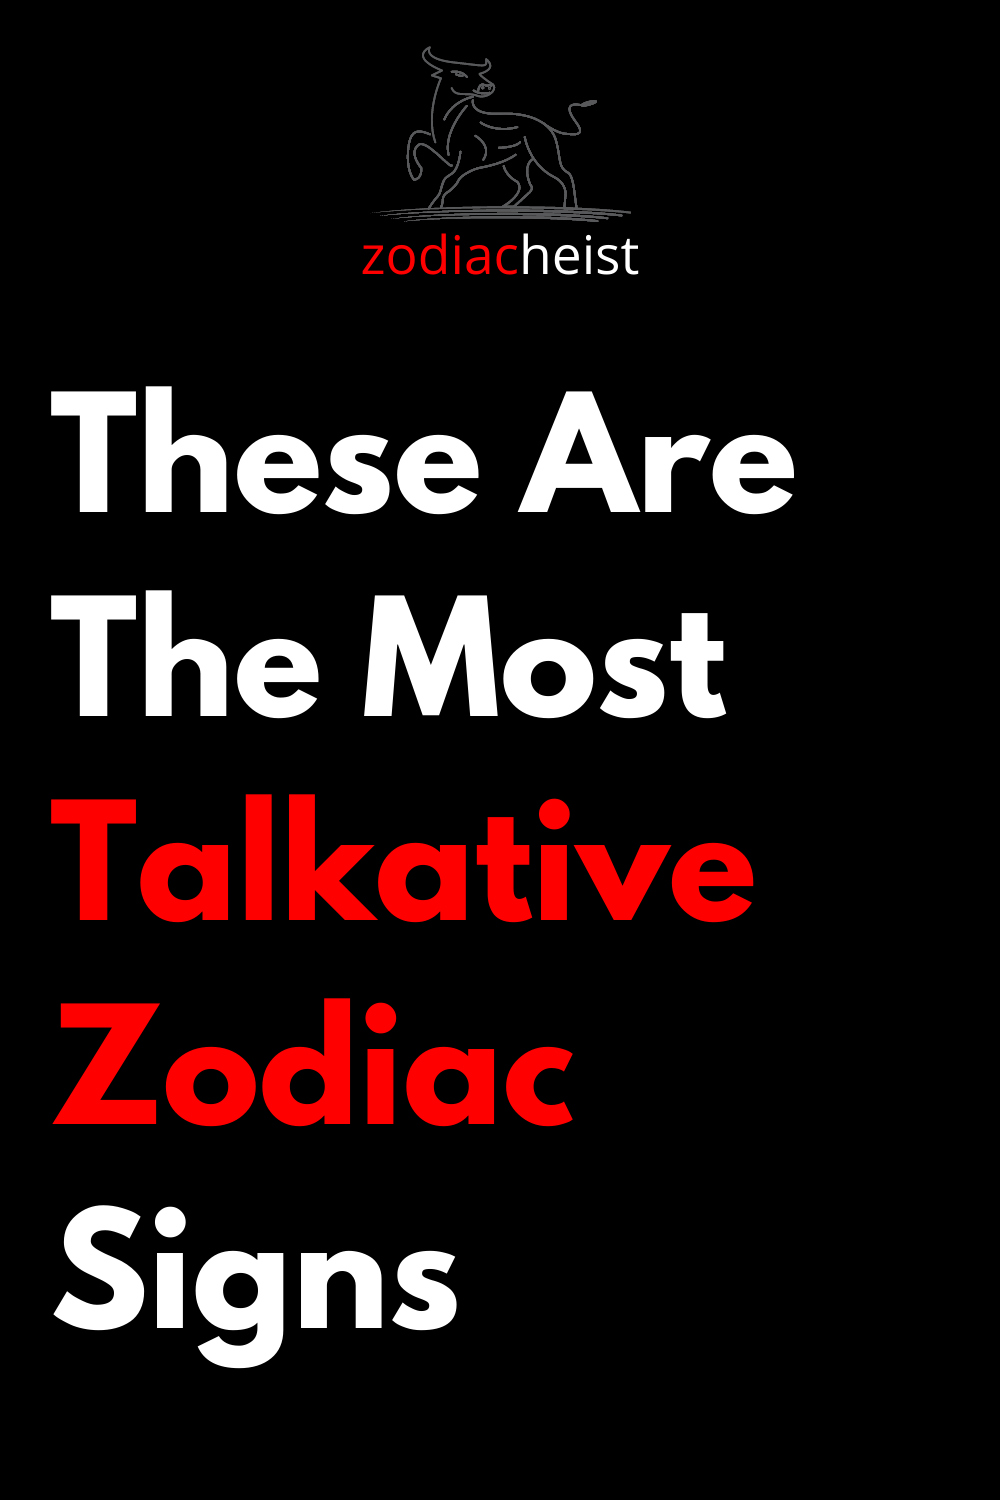 These Are The Most Talkative Zodiac Signs